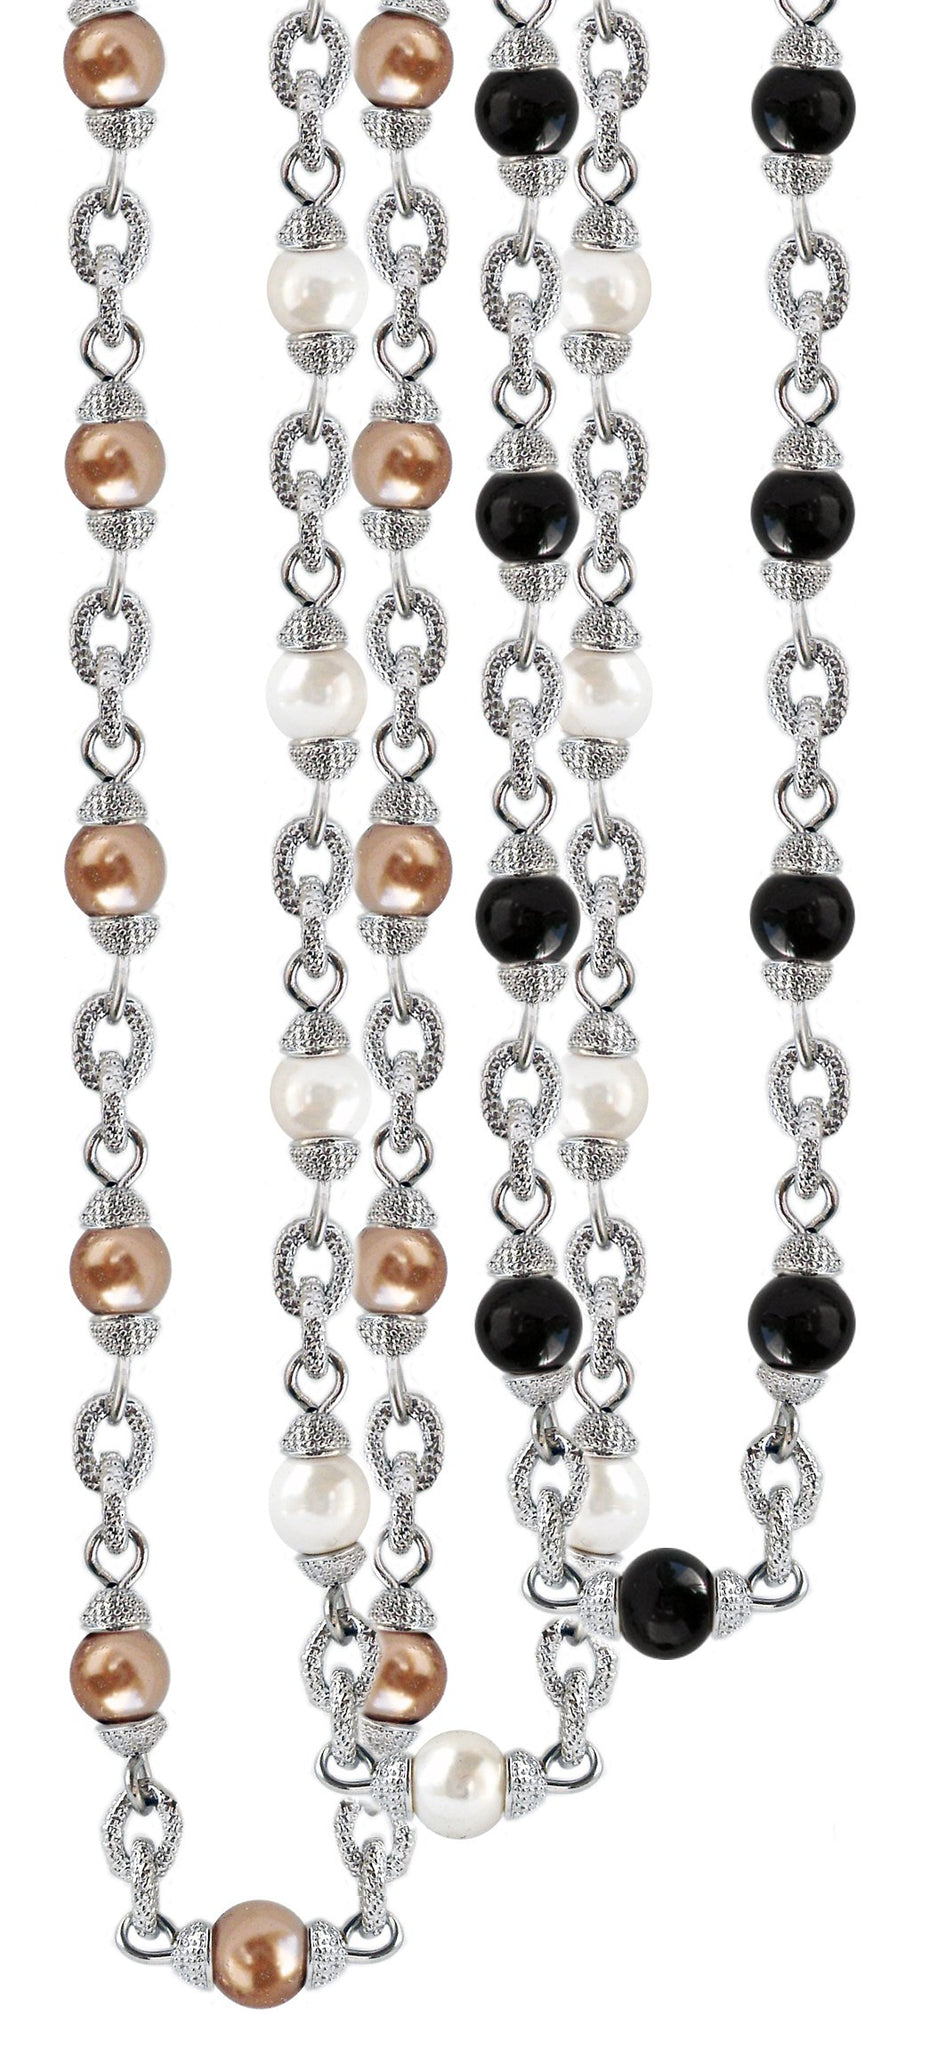 Satin textured 48" long Glass Pearls designer necklace with toggle closure finished in brass base.